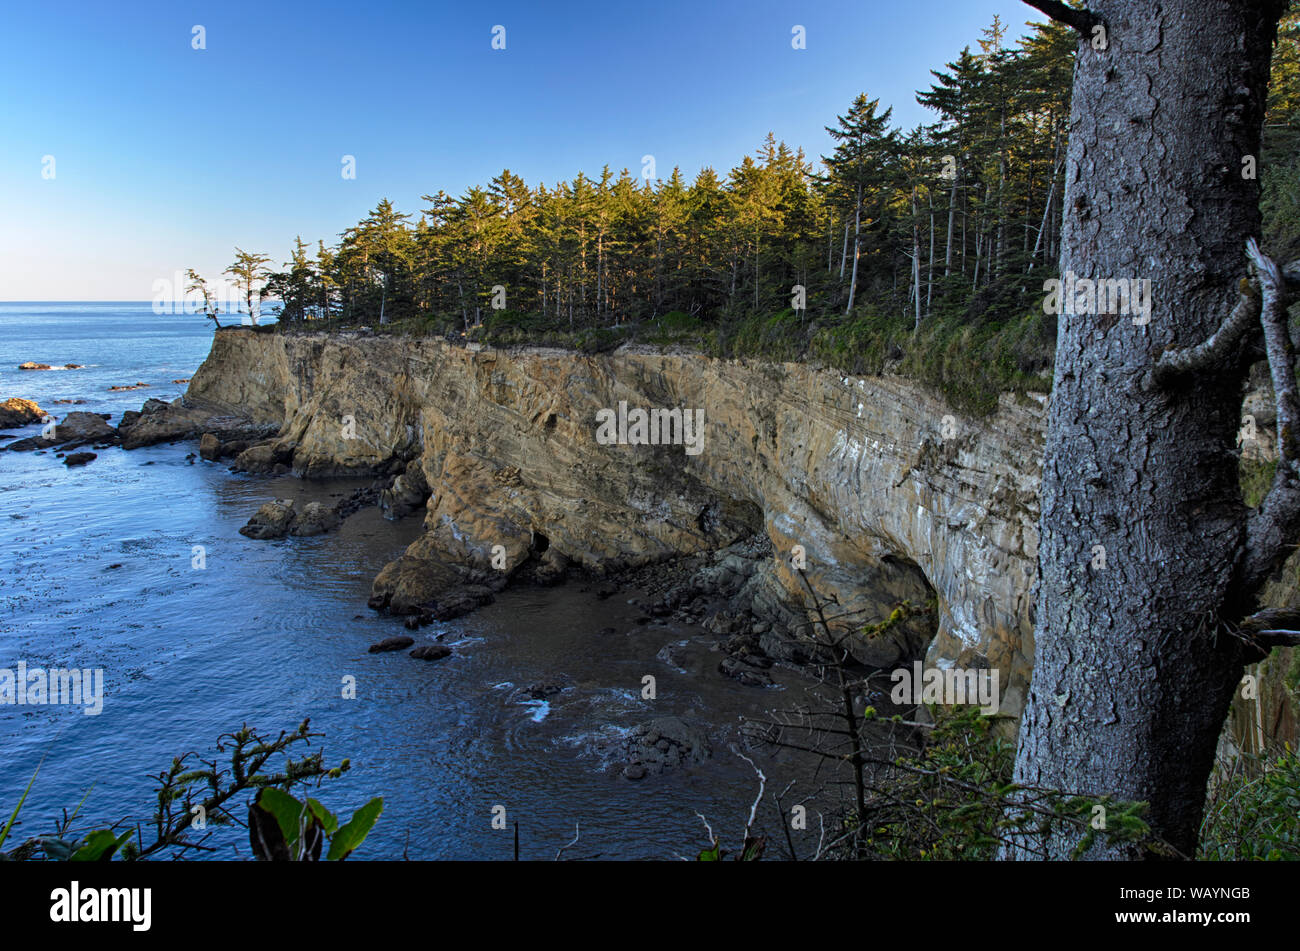 View from the cliffs at Shore Acres State Park, including a sea cave, on Cape Arago, near Charleston, Oregon, in the Coos Bay area Stock Photo